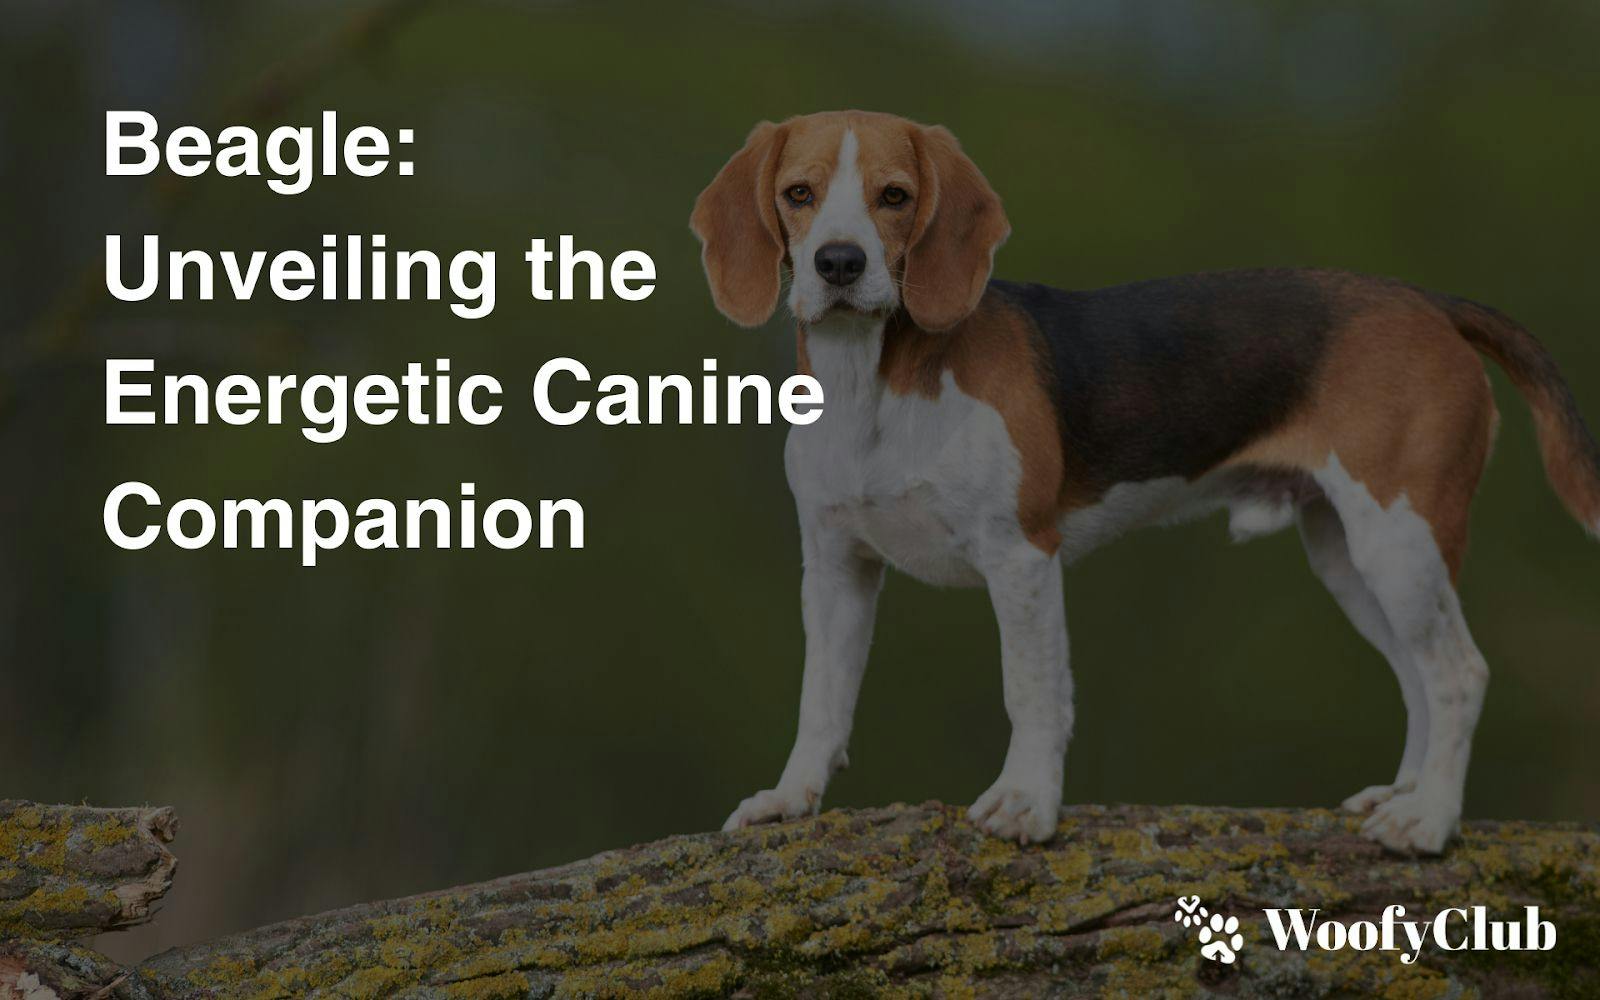 Beagle: Unveiling The Energetic Canine Companion